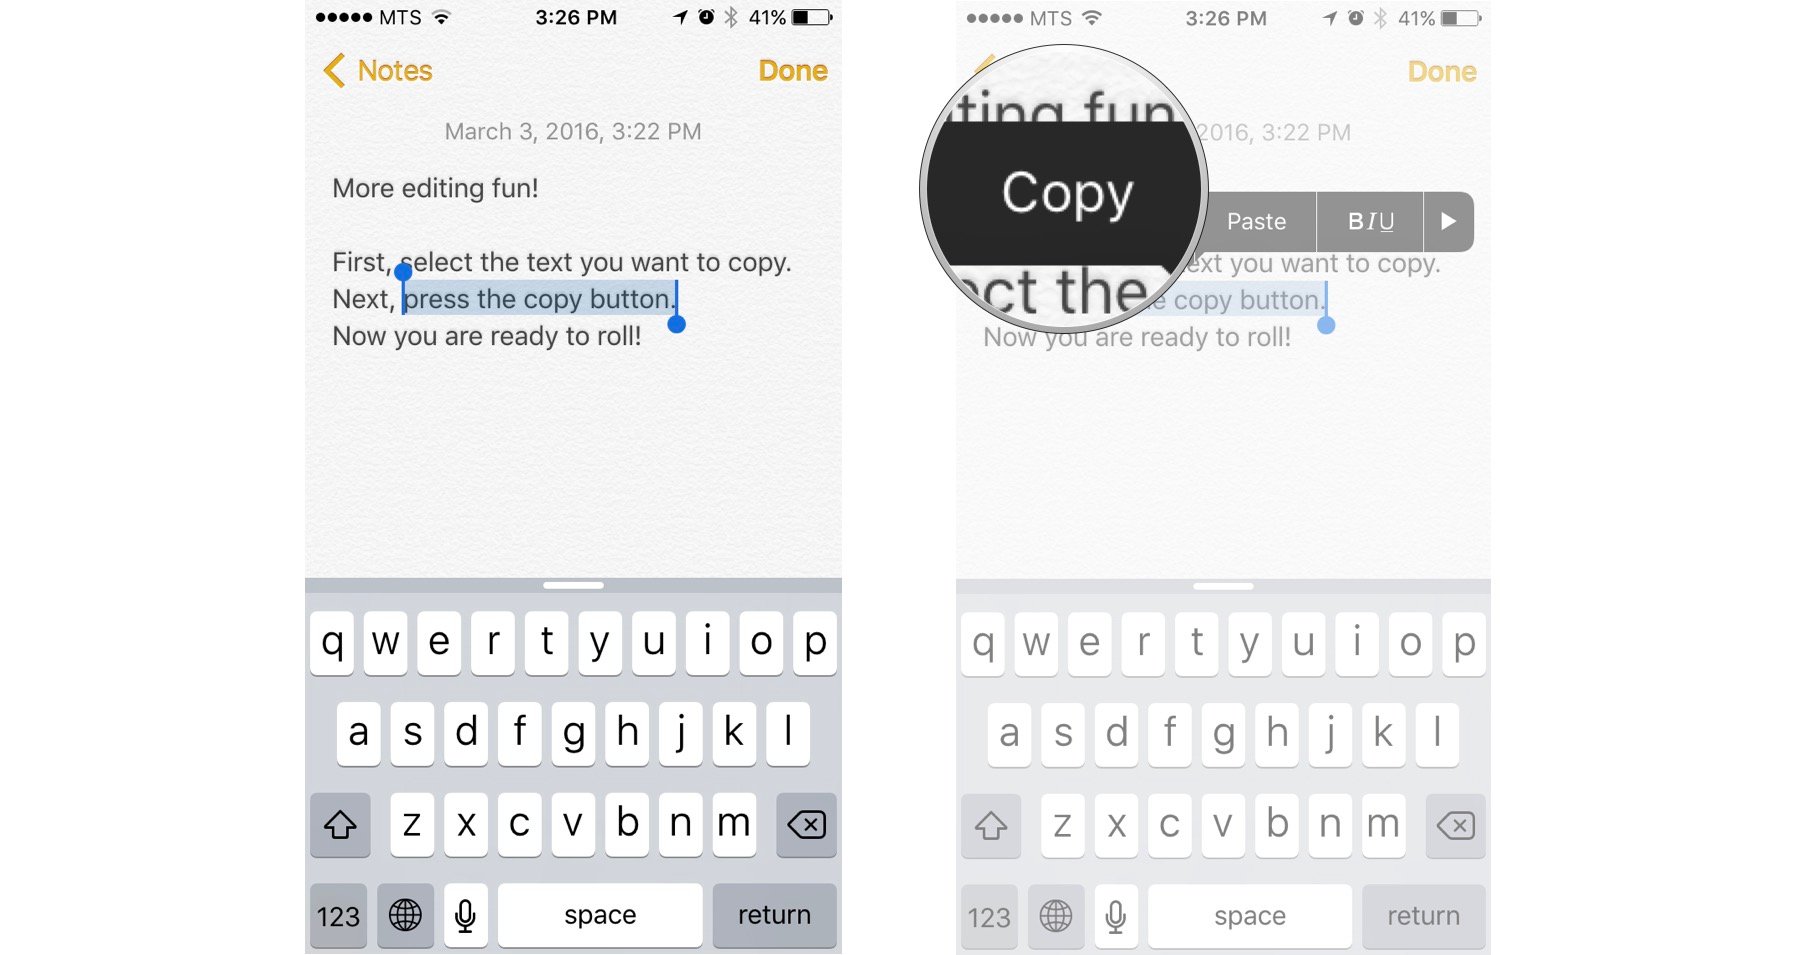 Select the text you want to copy and then tap the copy button one the menu bar above.